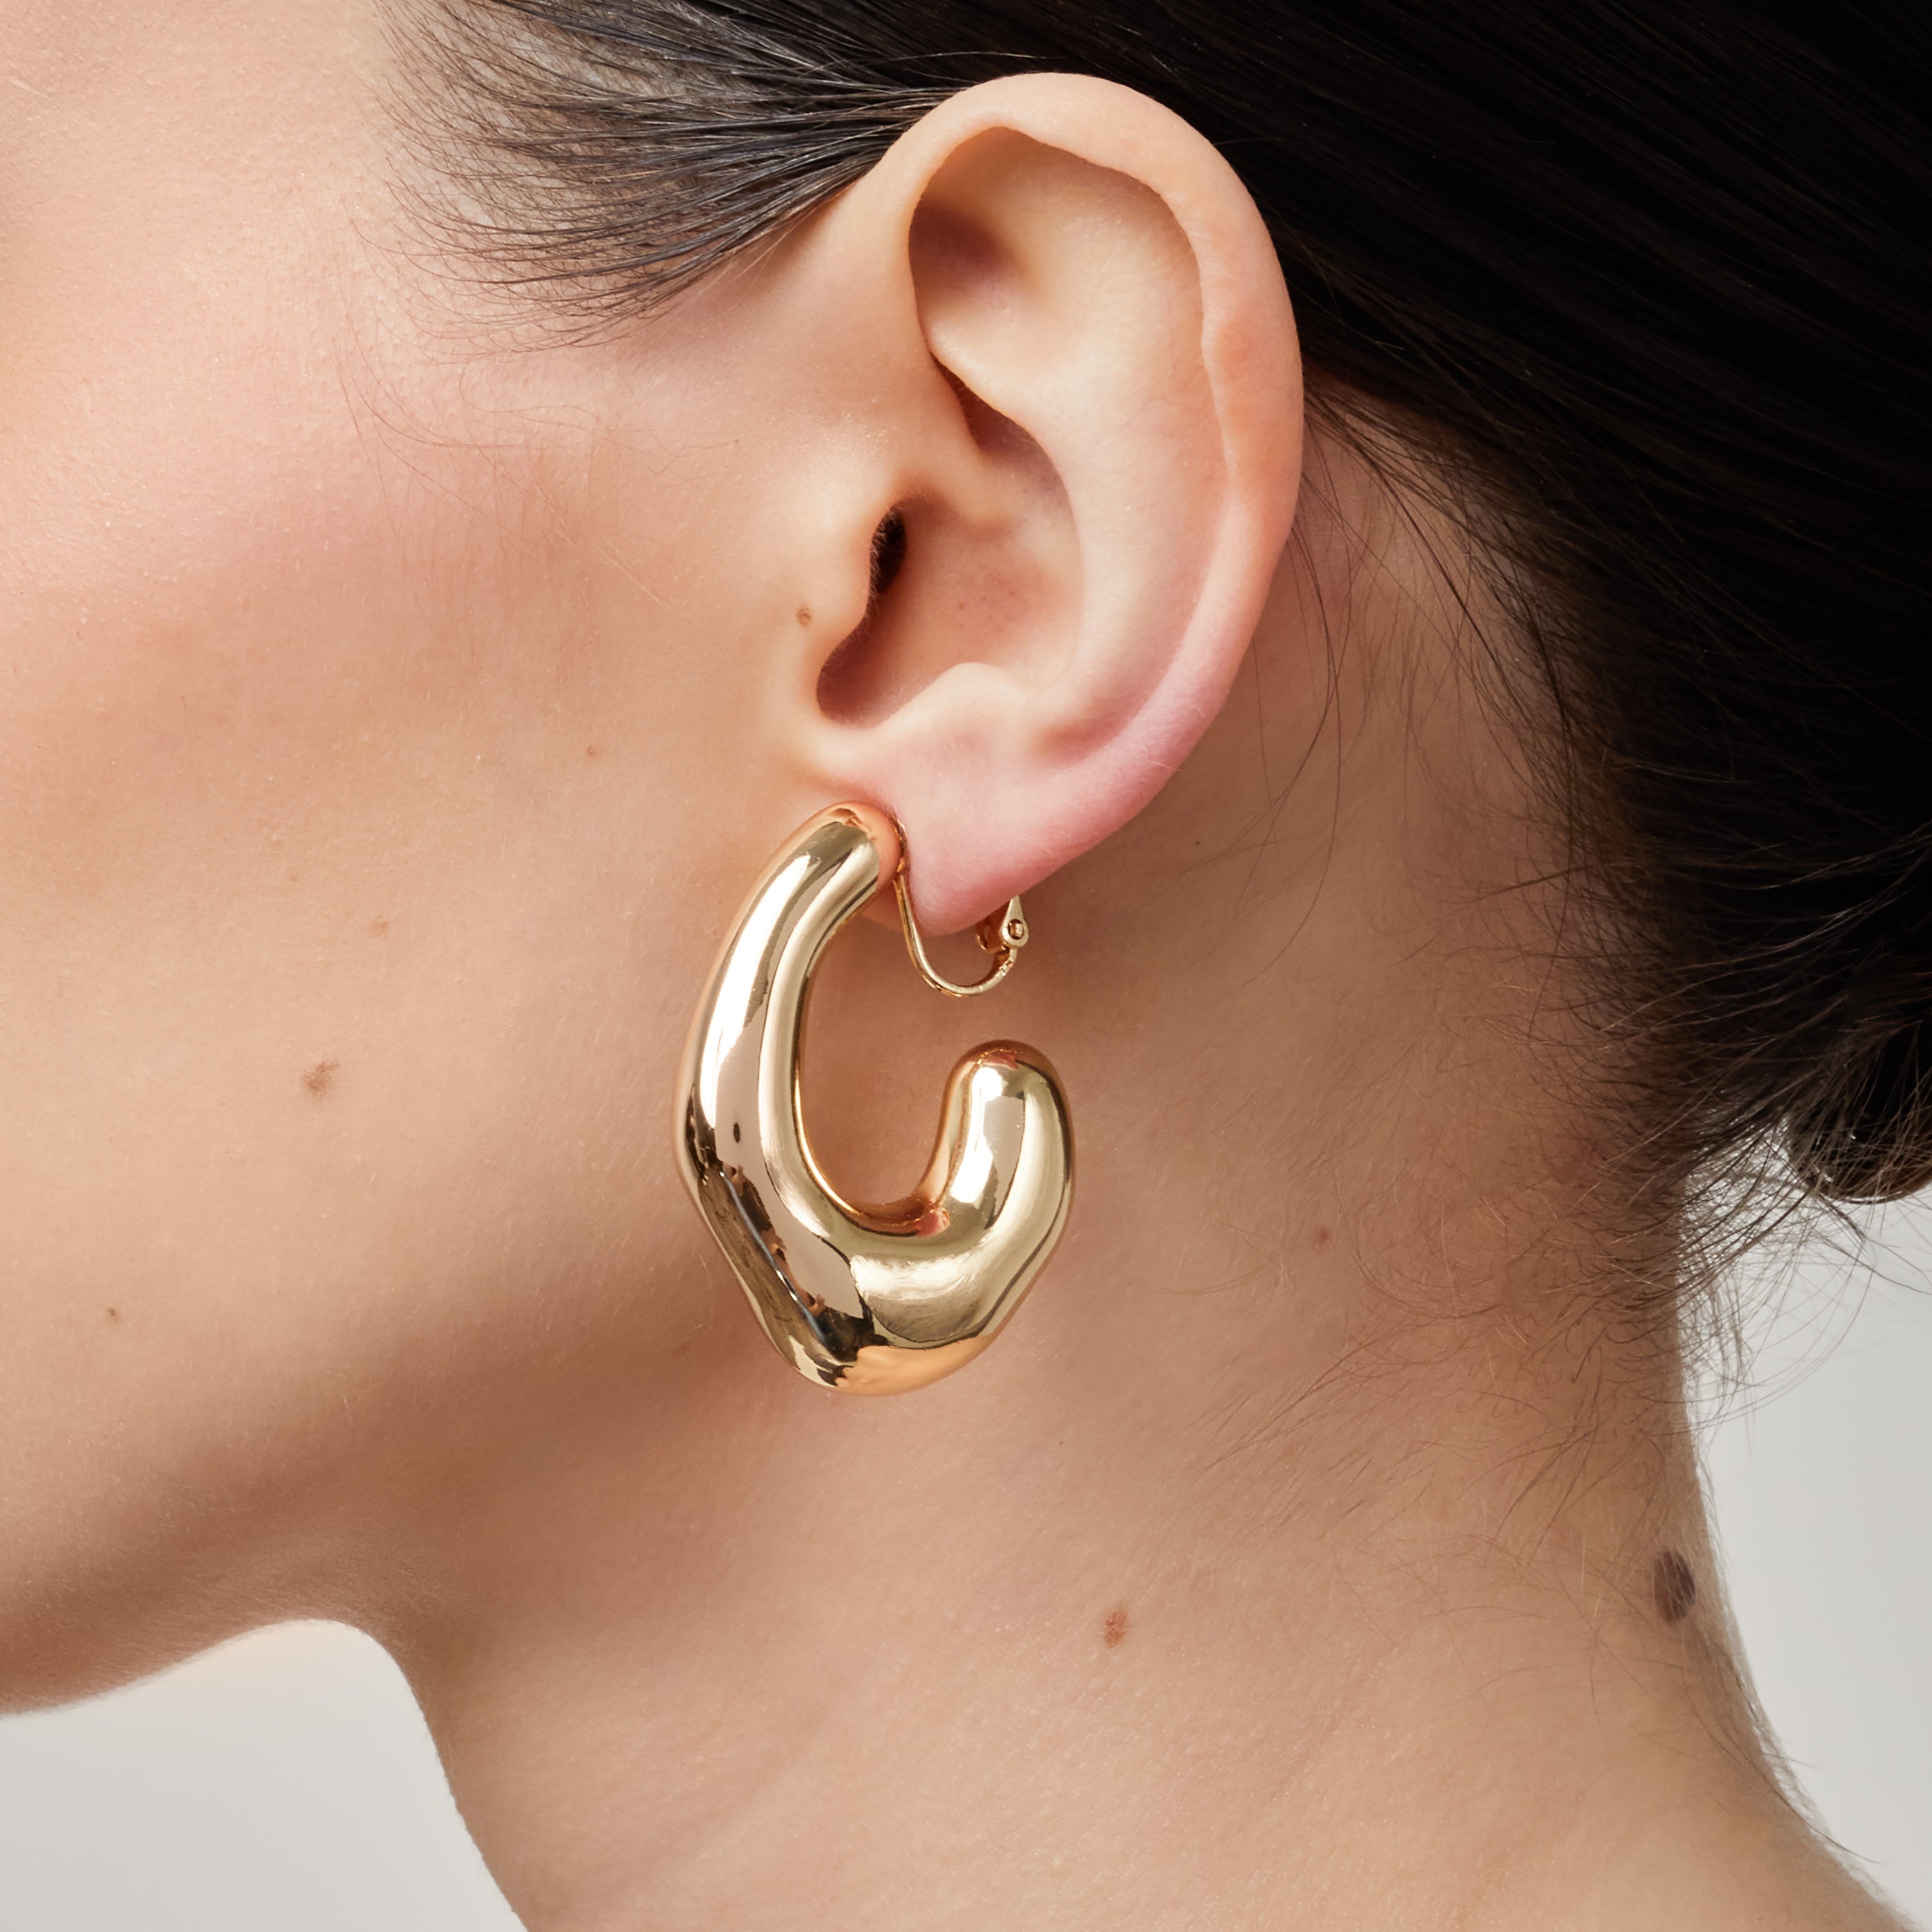 A model wearing the Curvy Hoop Clip On Earrings in Gold. These earrings offer comfort and versatility with a secure screwback closure that suits all ear sizes. Enjoy 8-12 hours of wear without discomfort, suitable for any ear type. Please note that each purchase includes one pair.